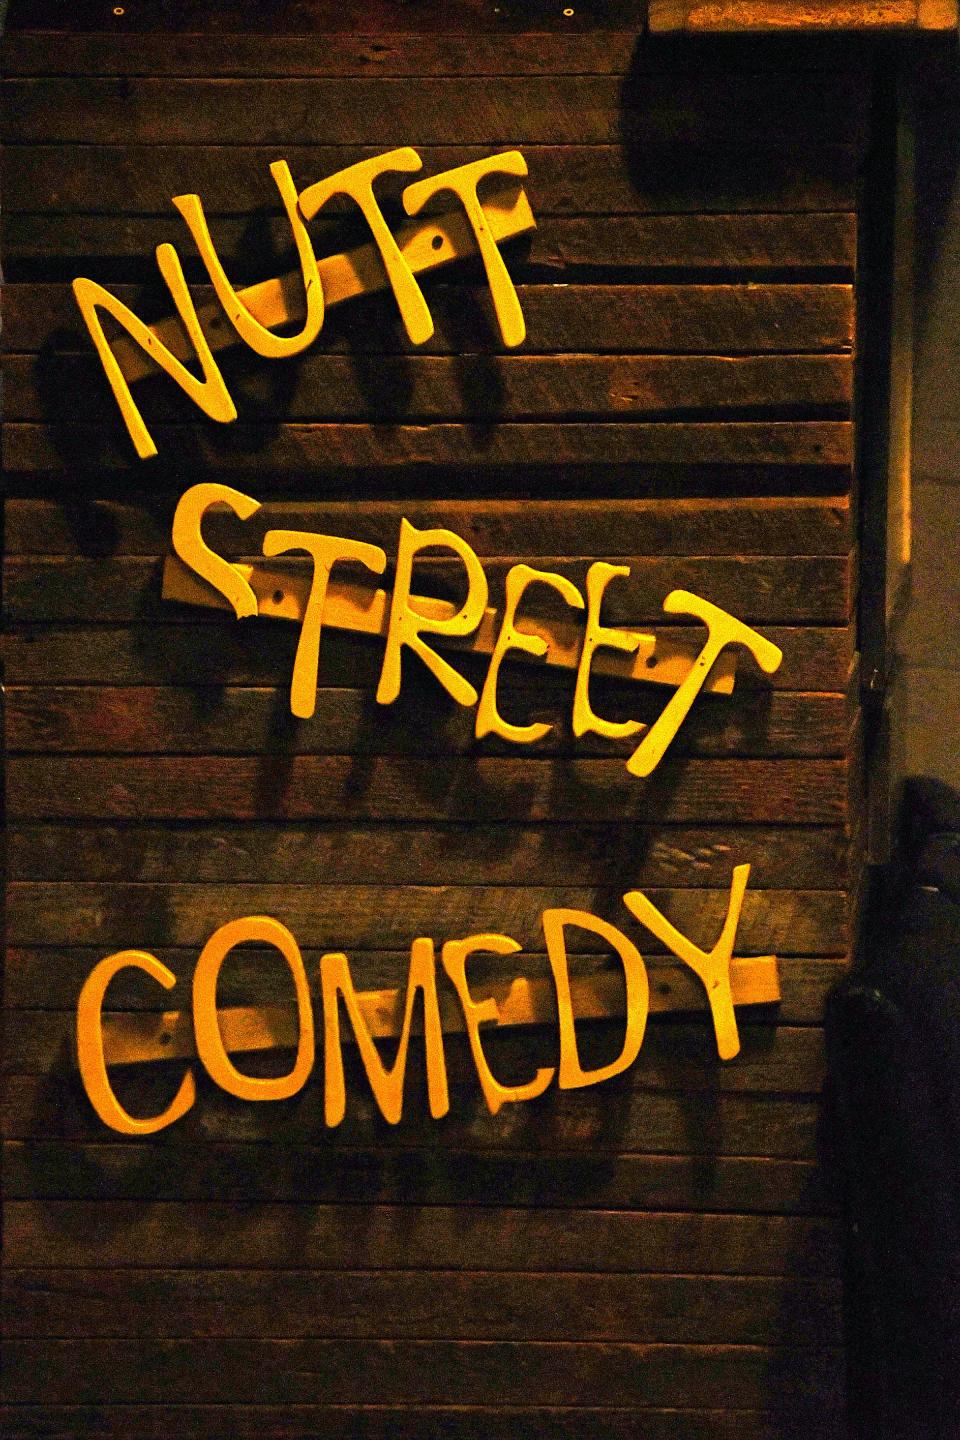 Sign at Wilmington's Dead Crow Comedy Room pays homage to the club's origins as the Nutt Street Comedy Room.